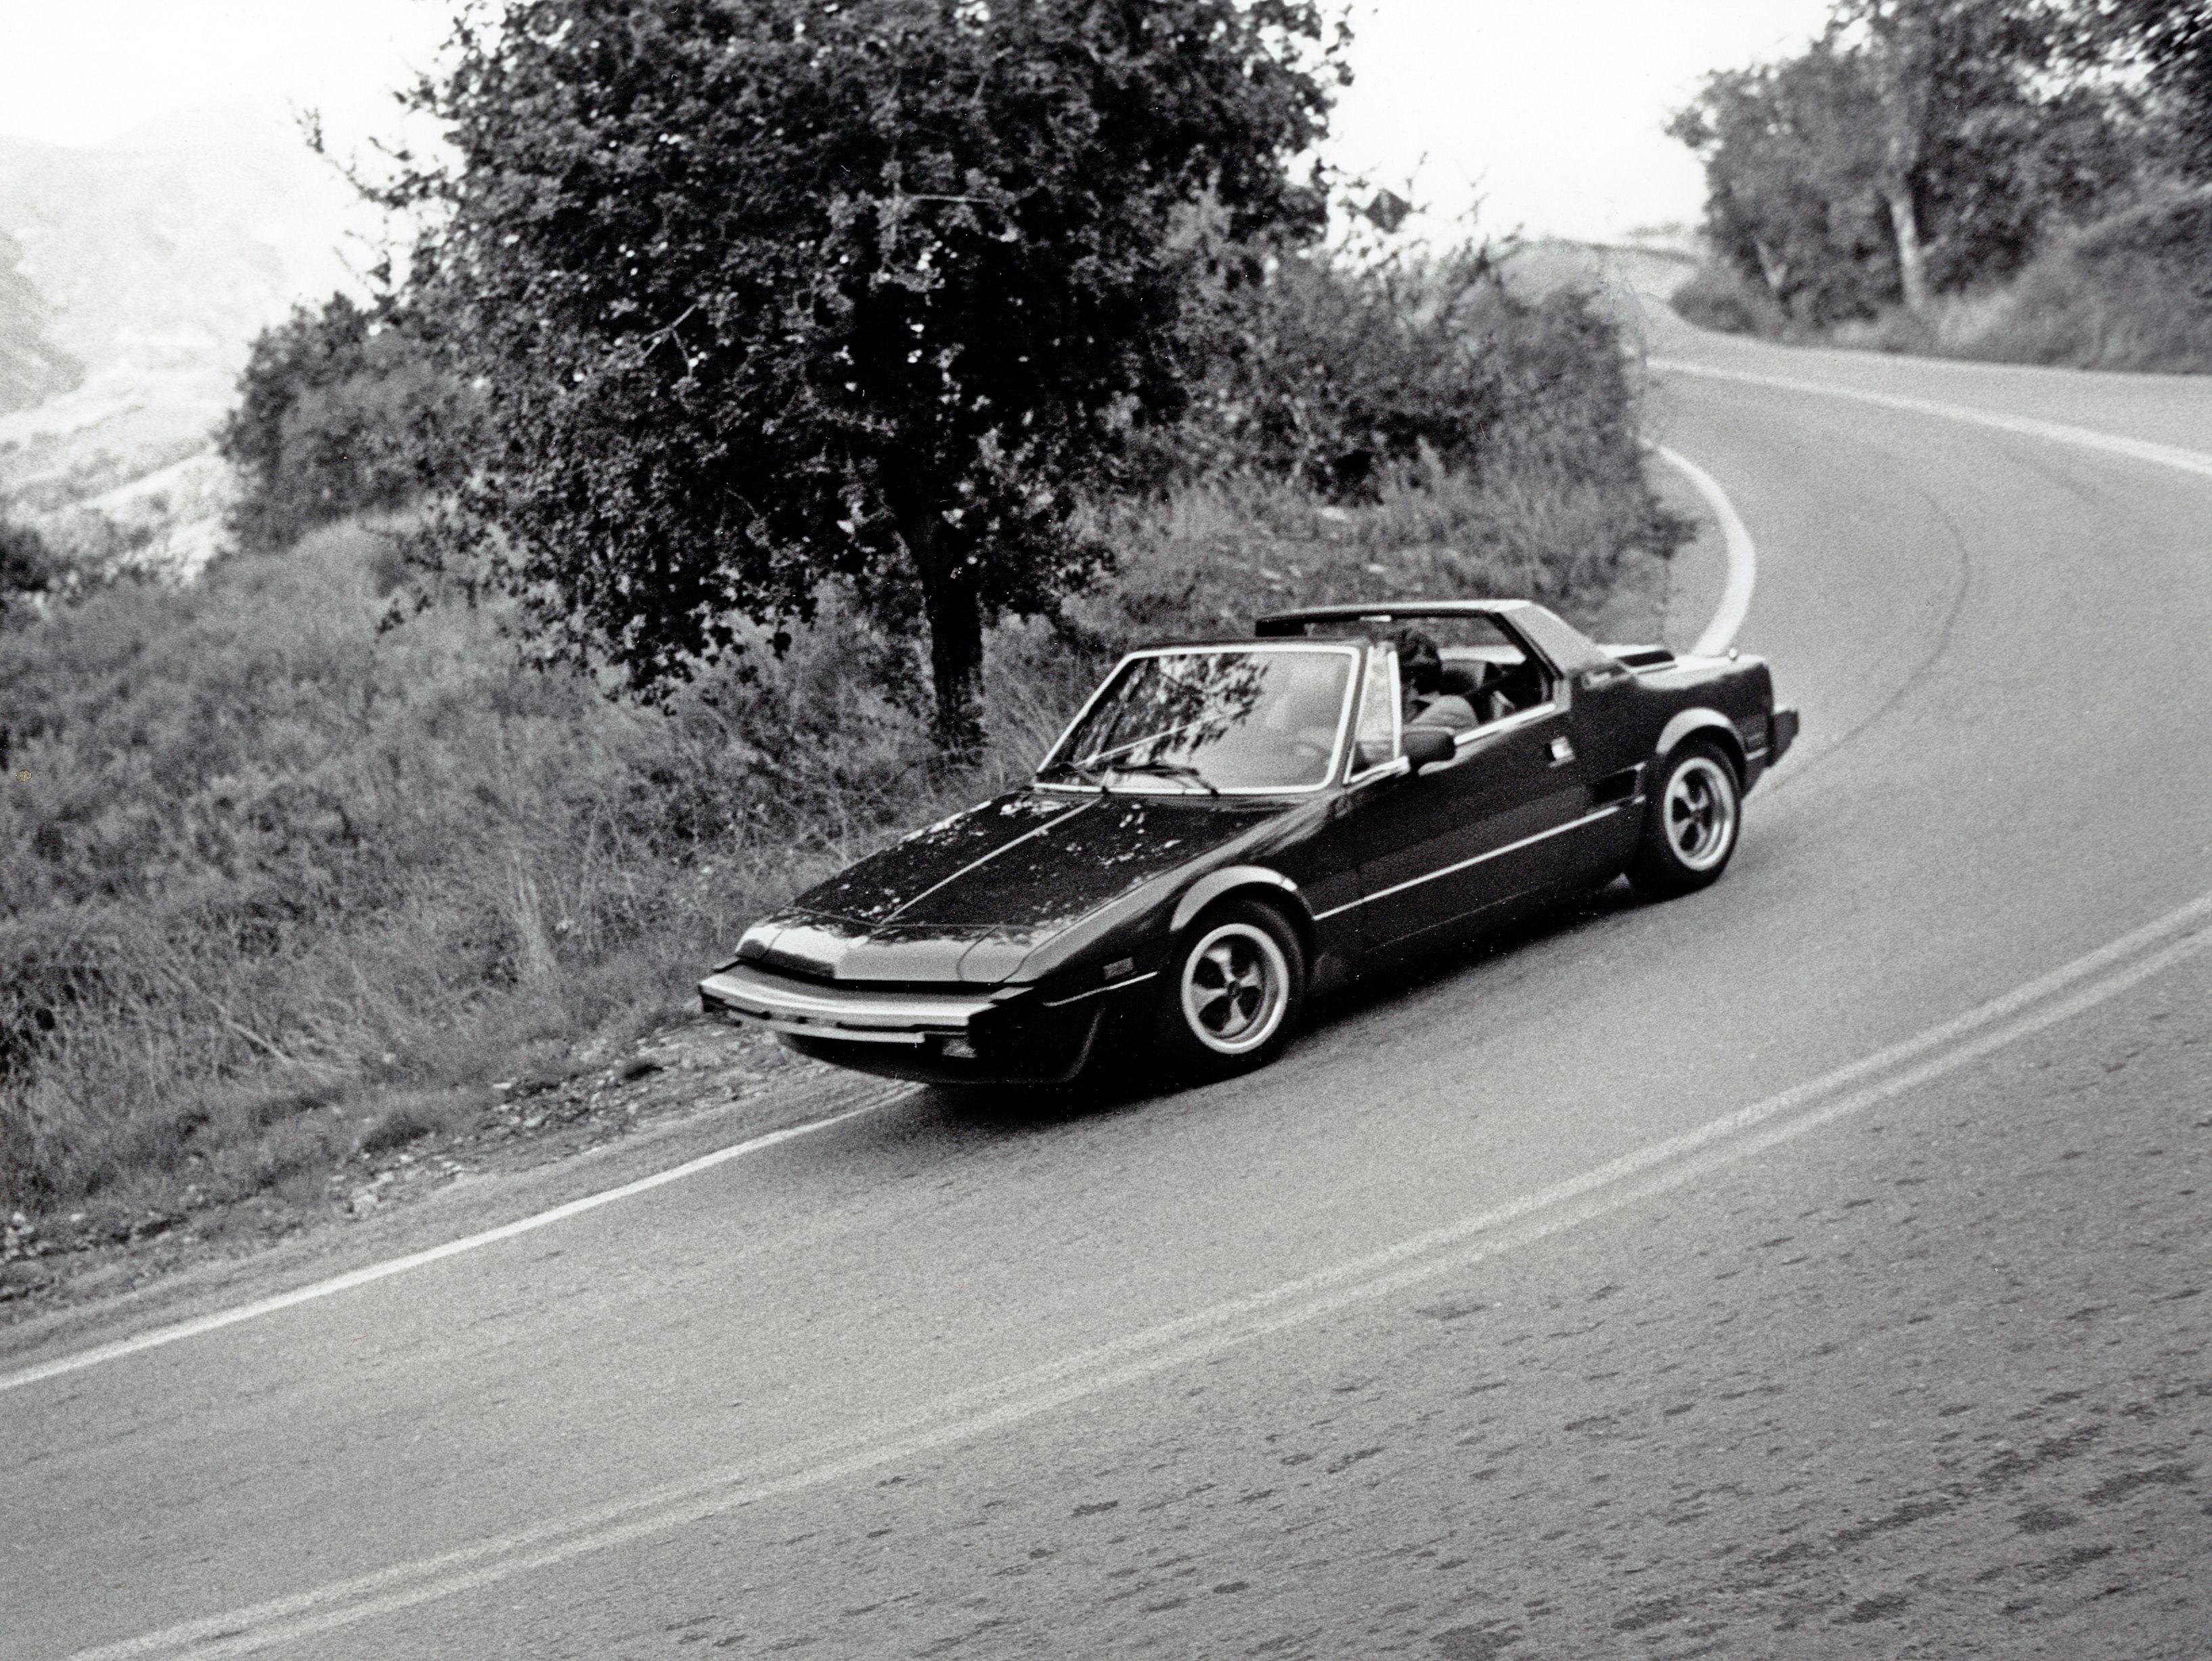 From the Archive: 1979 Fiat X1/9 Tested